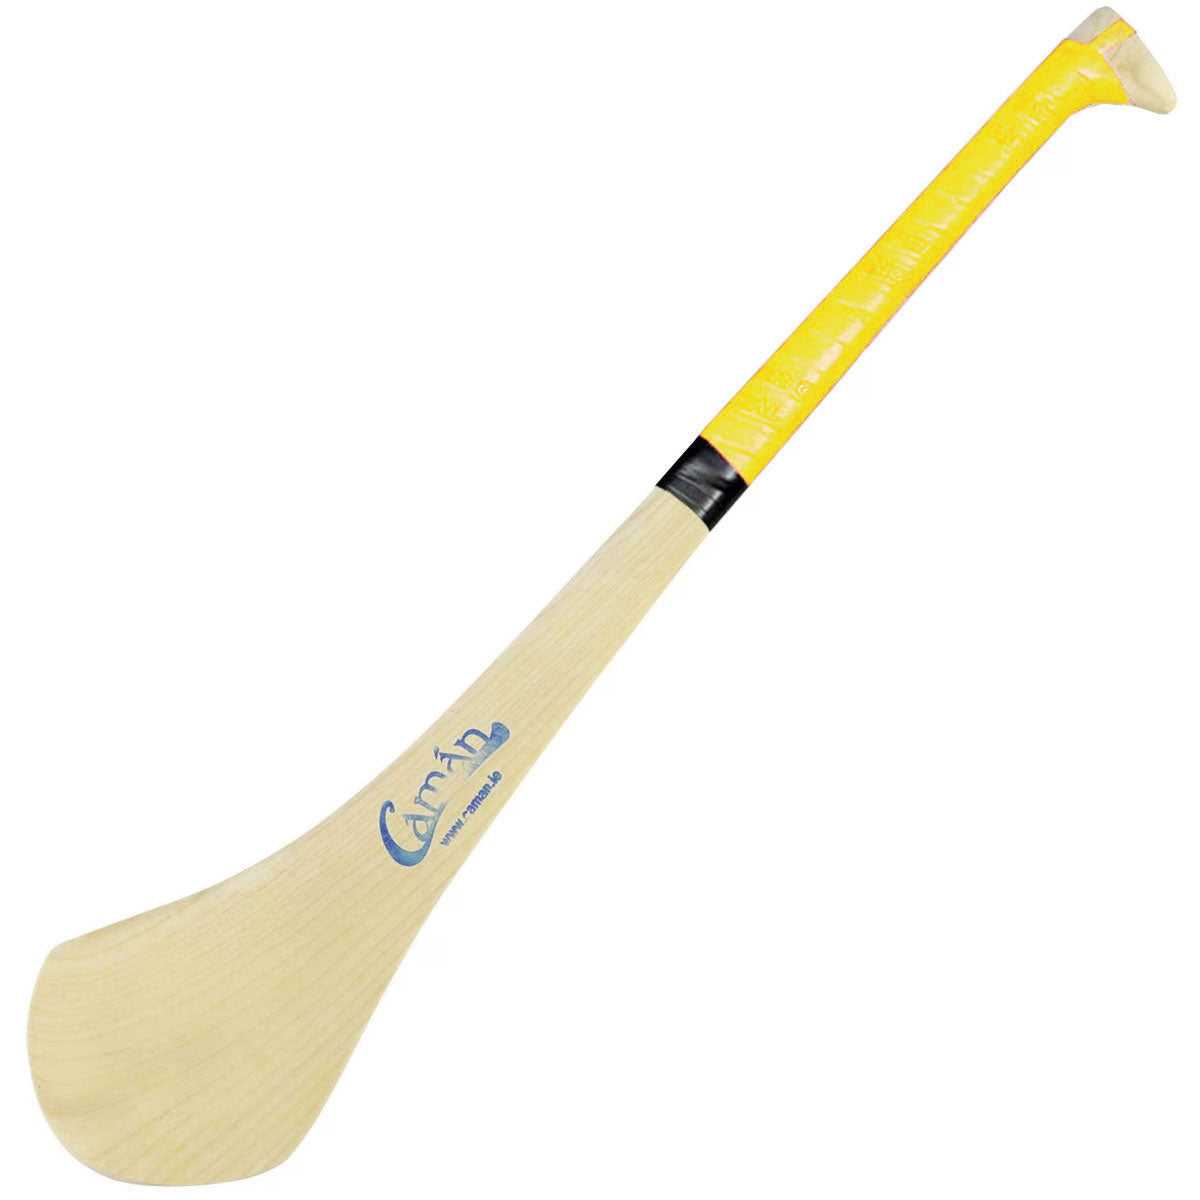 Caman Hurling Stick size 28 (Inches)